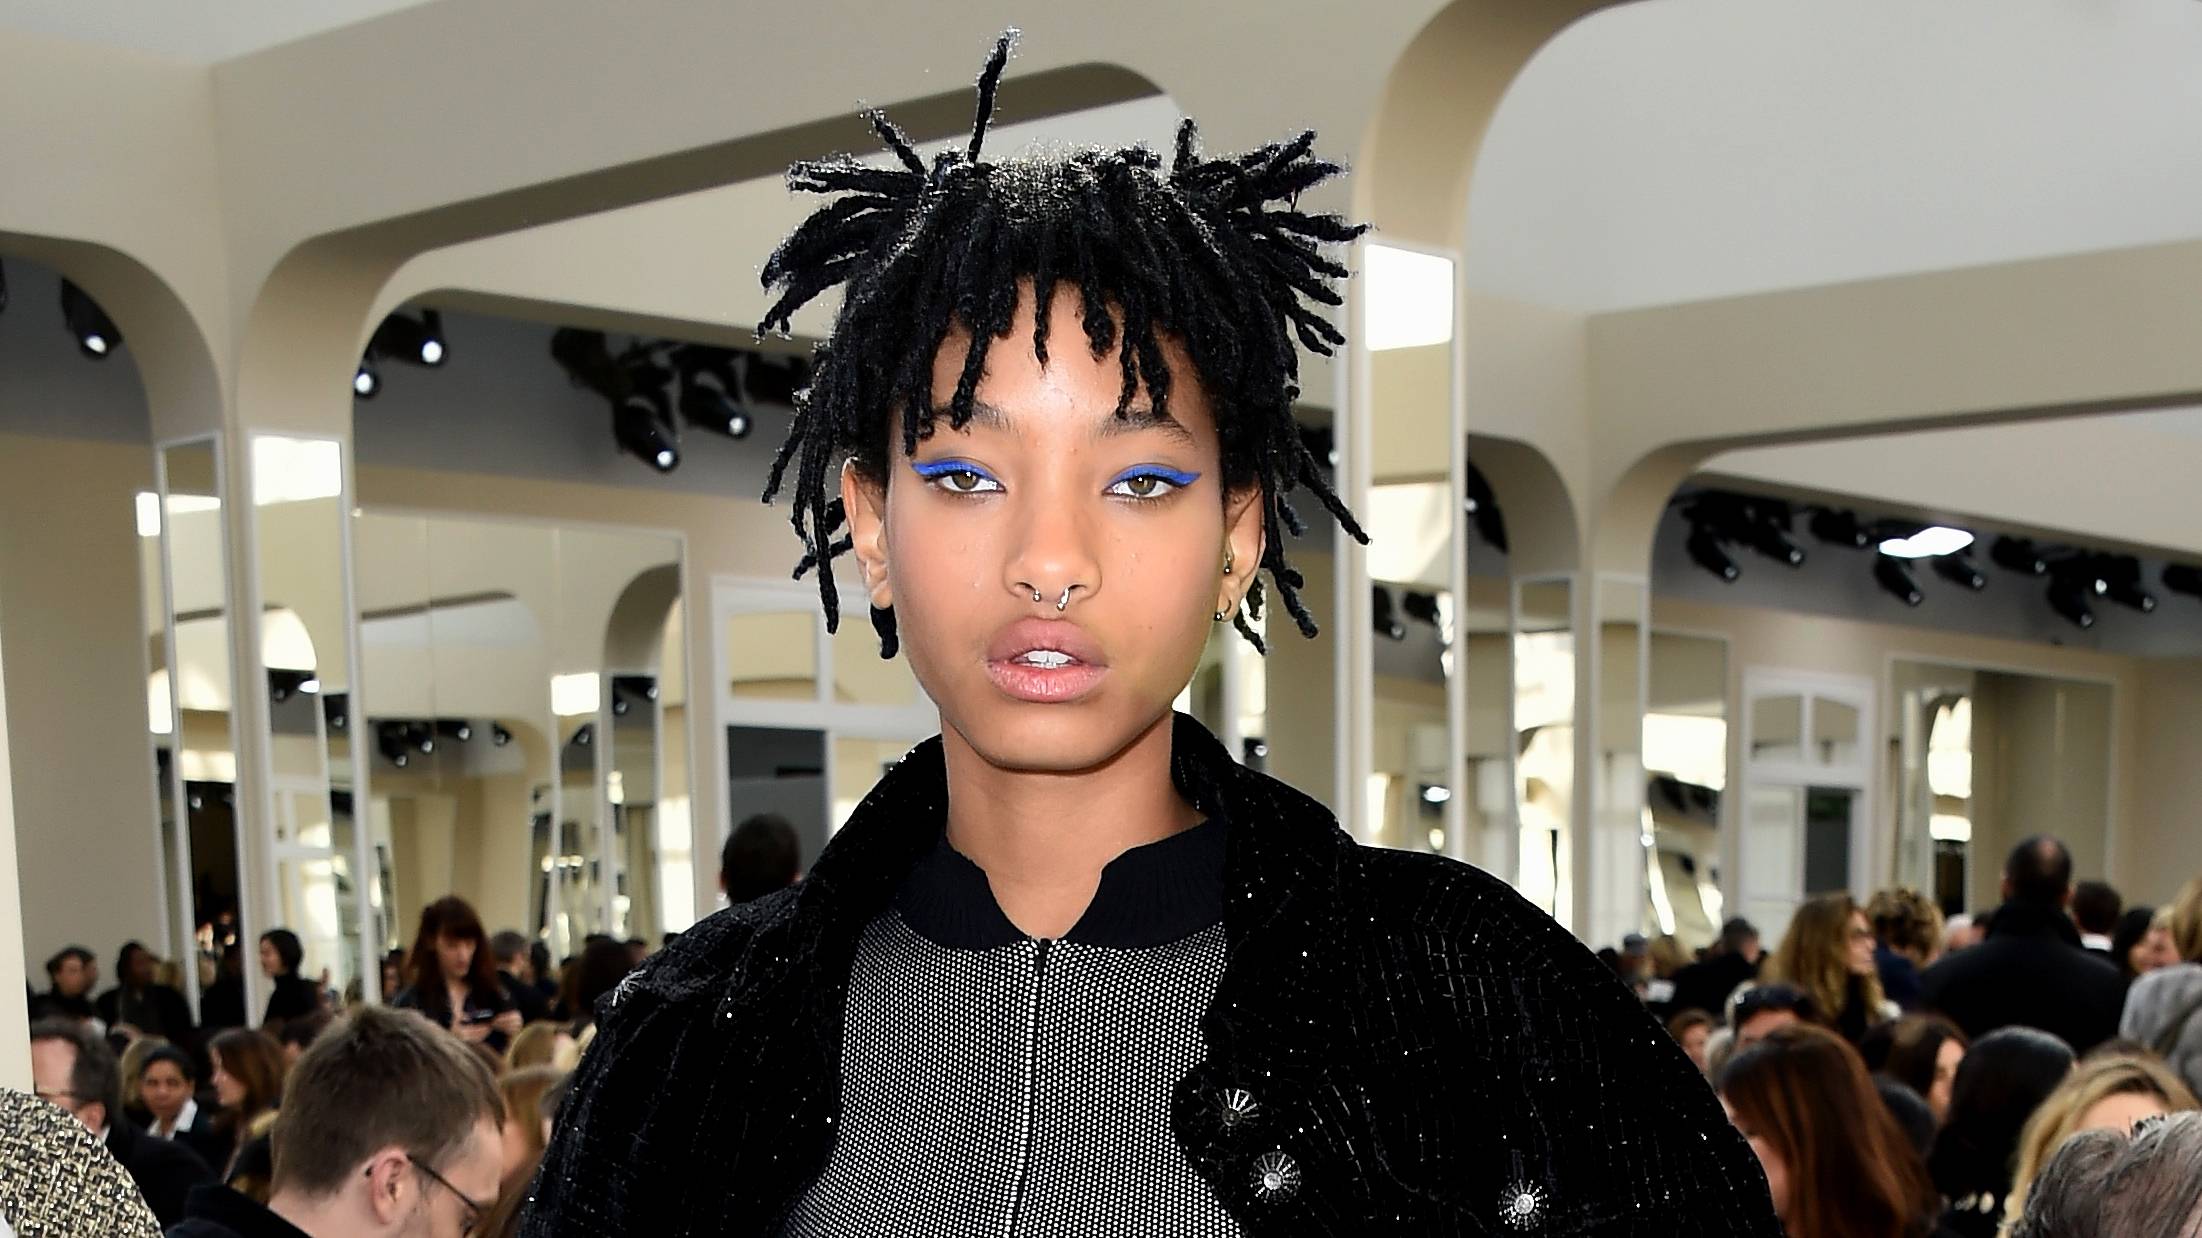 PARIS, FRANCE - MARCH 08:  Willow Smith attends the Chanel show as part of the Paris Fashion Week Womenswear Fall/Winter 2016/2017 on March 8, 2016 in Paris, France.  (Photo by Rindoff/Le Segretain/Getty Images)